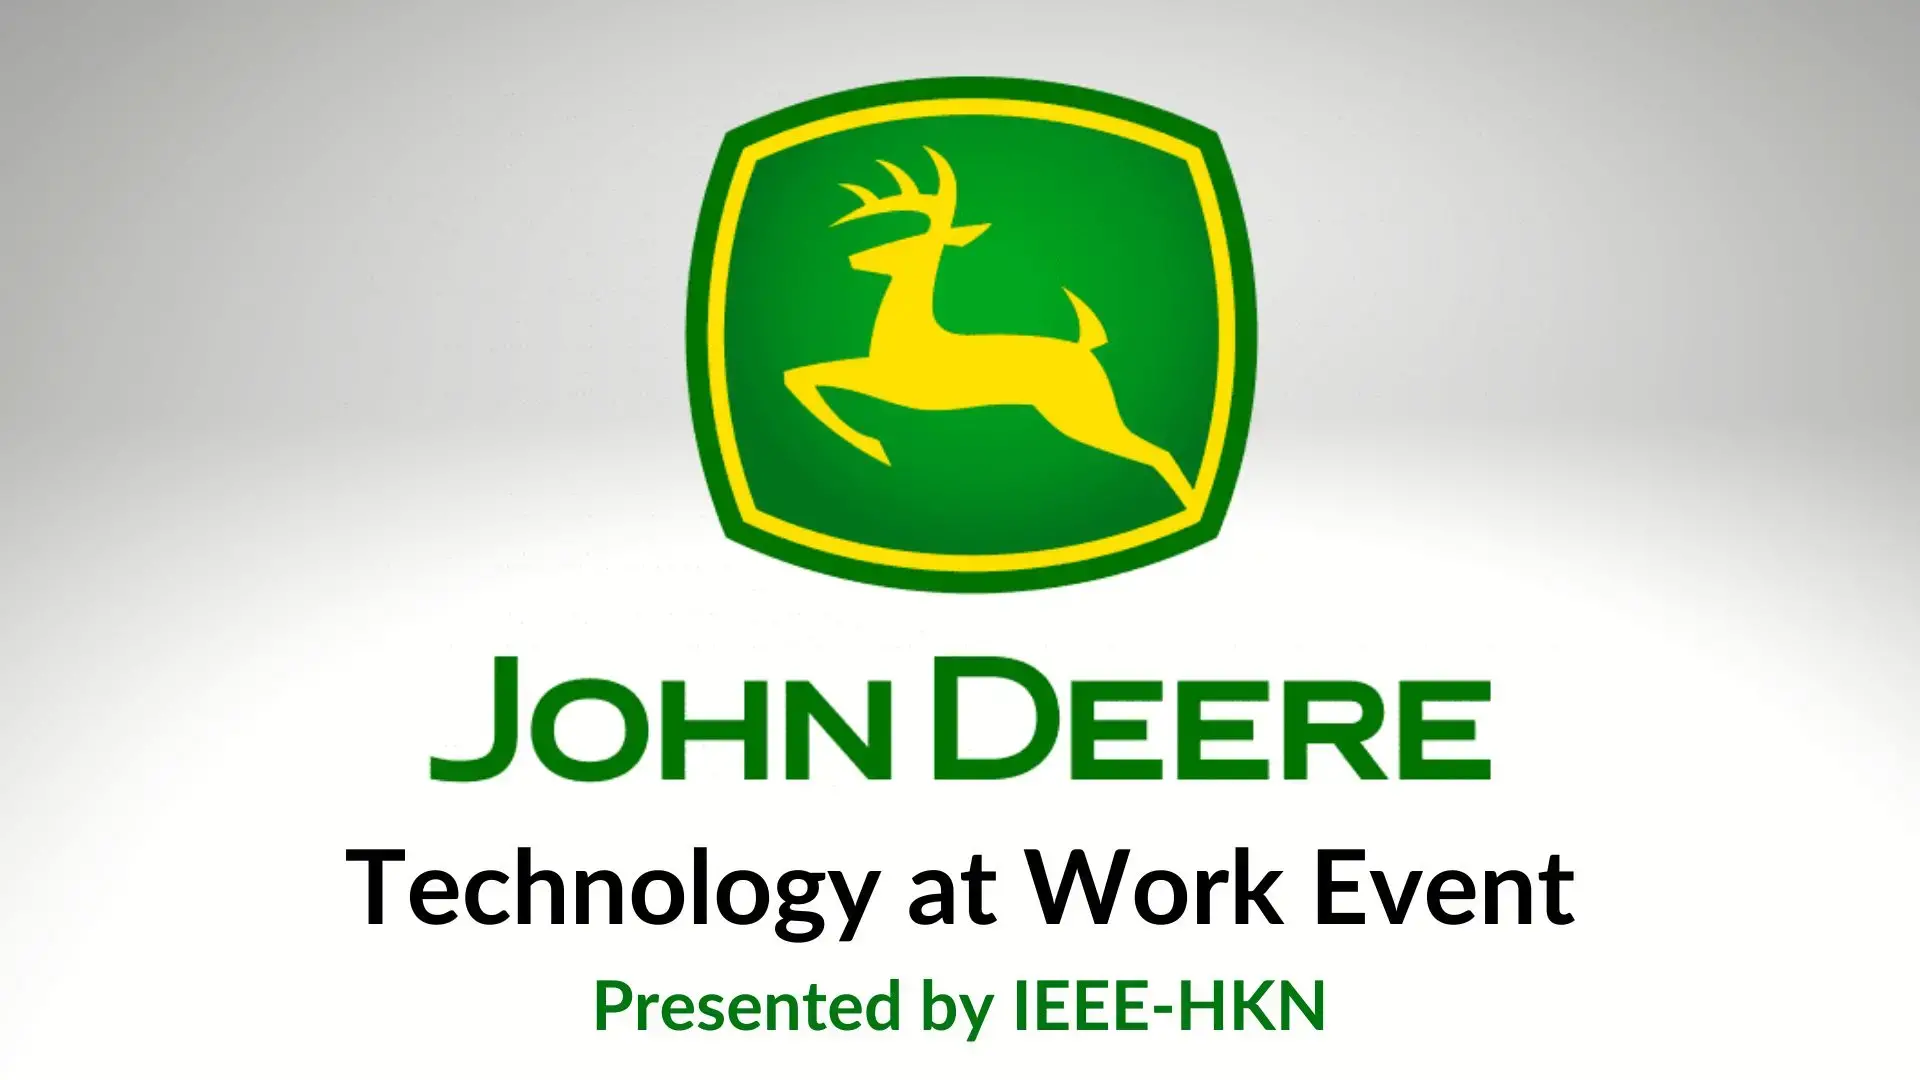 John Deere Technology at Work Event Presented by IEEE-HKN